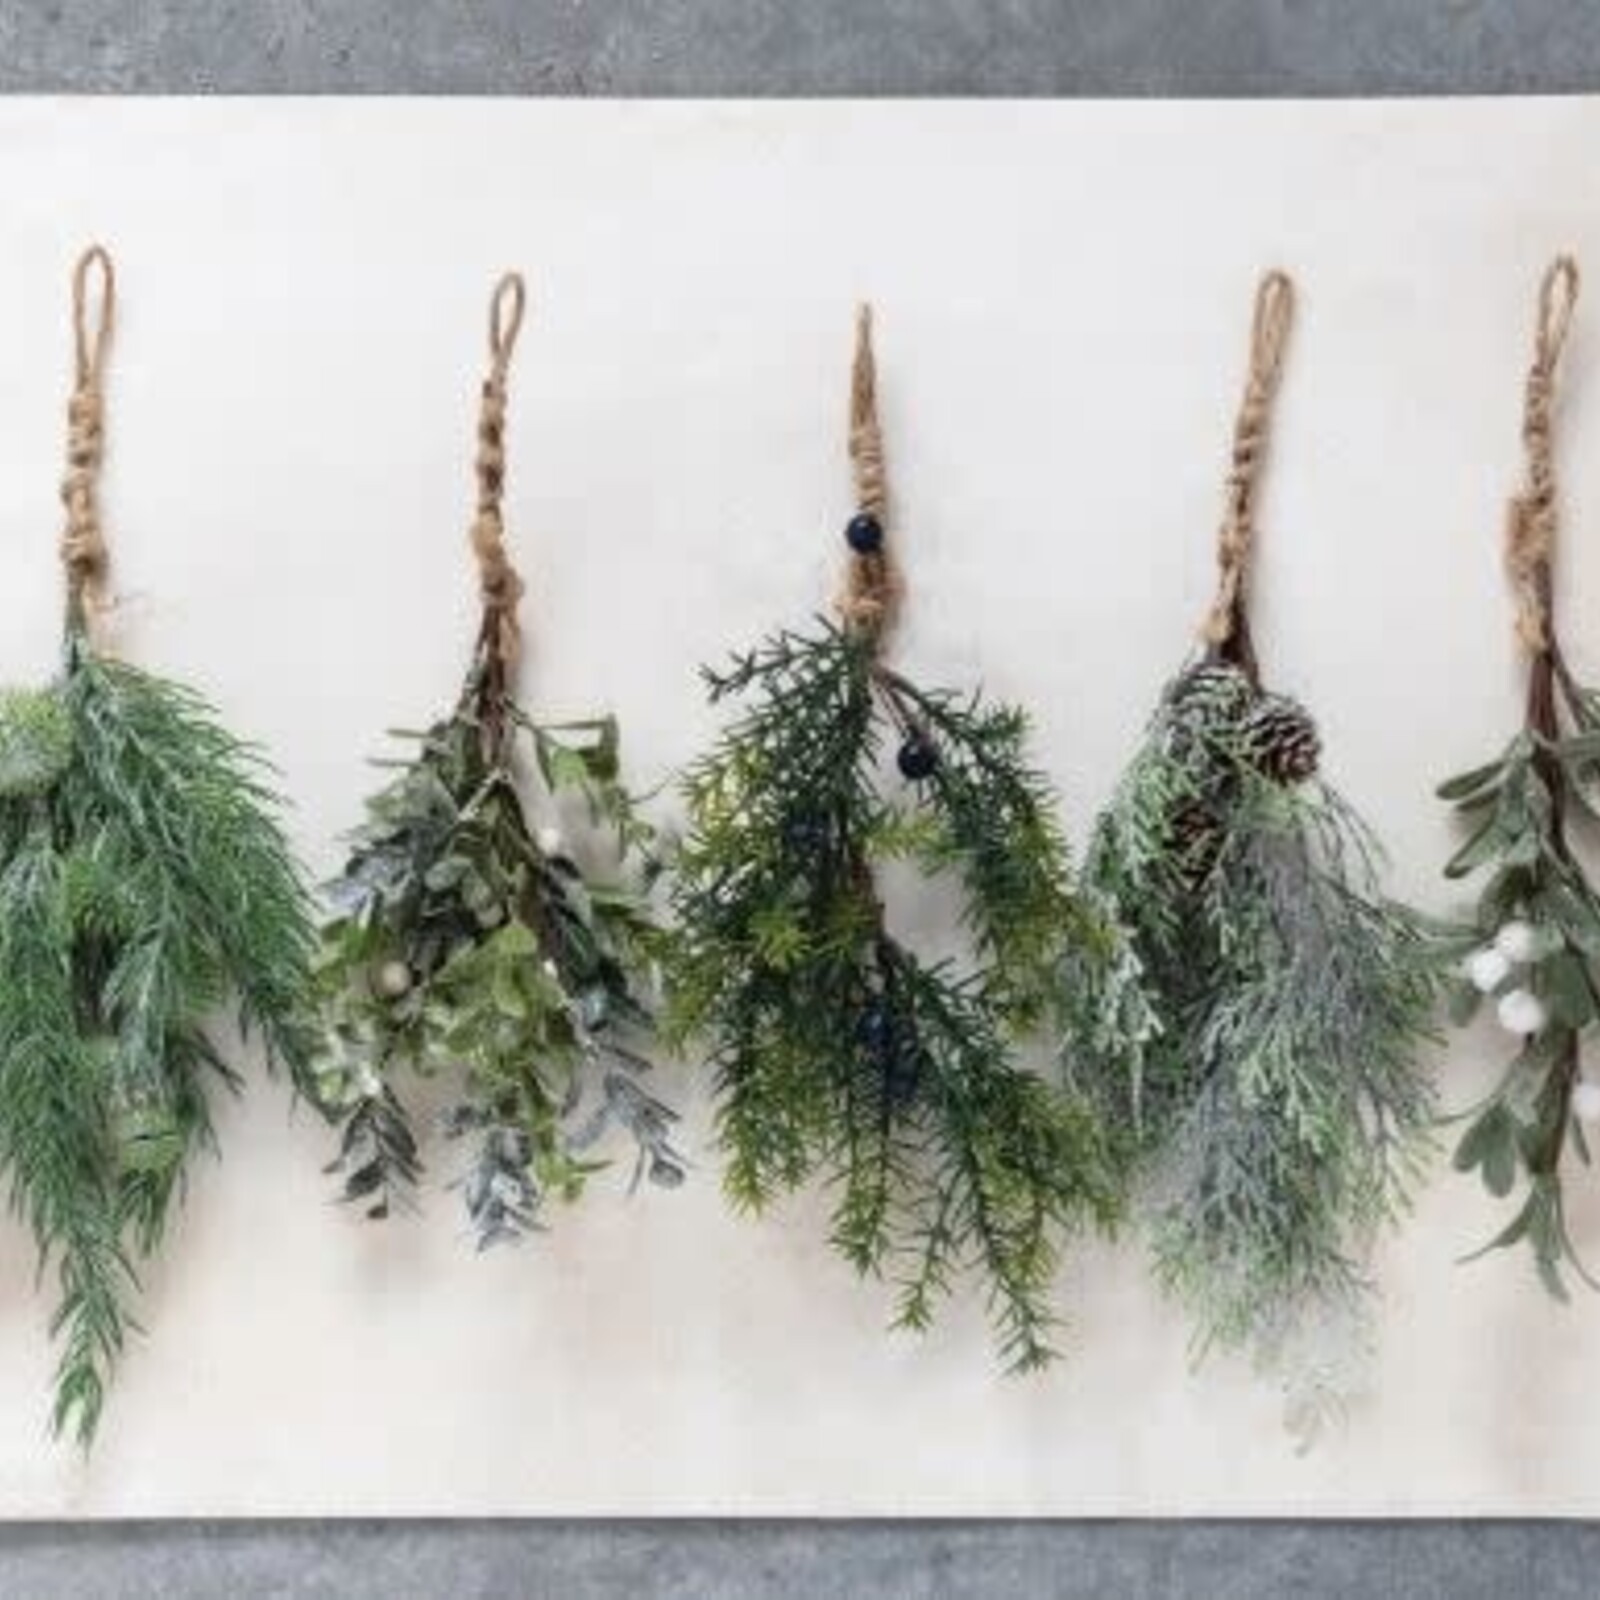 Creative Co-Op 12-1/2" Hanging Faux Evergreen Bunch loading=